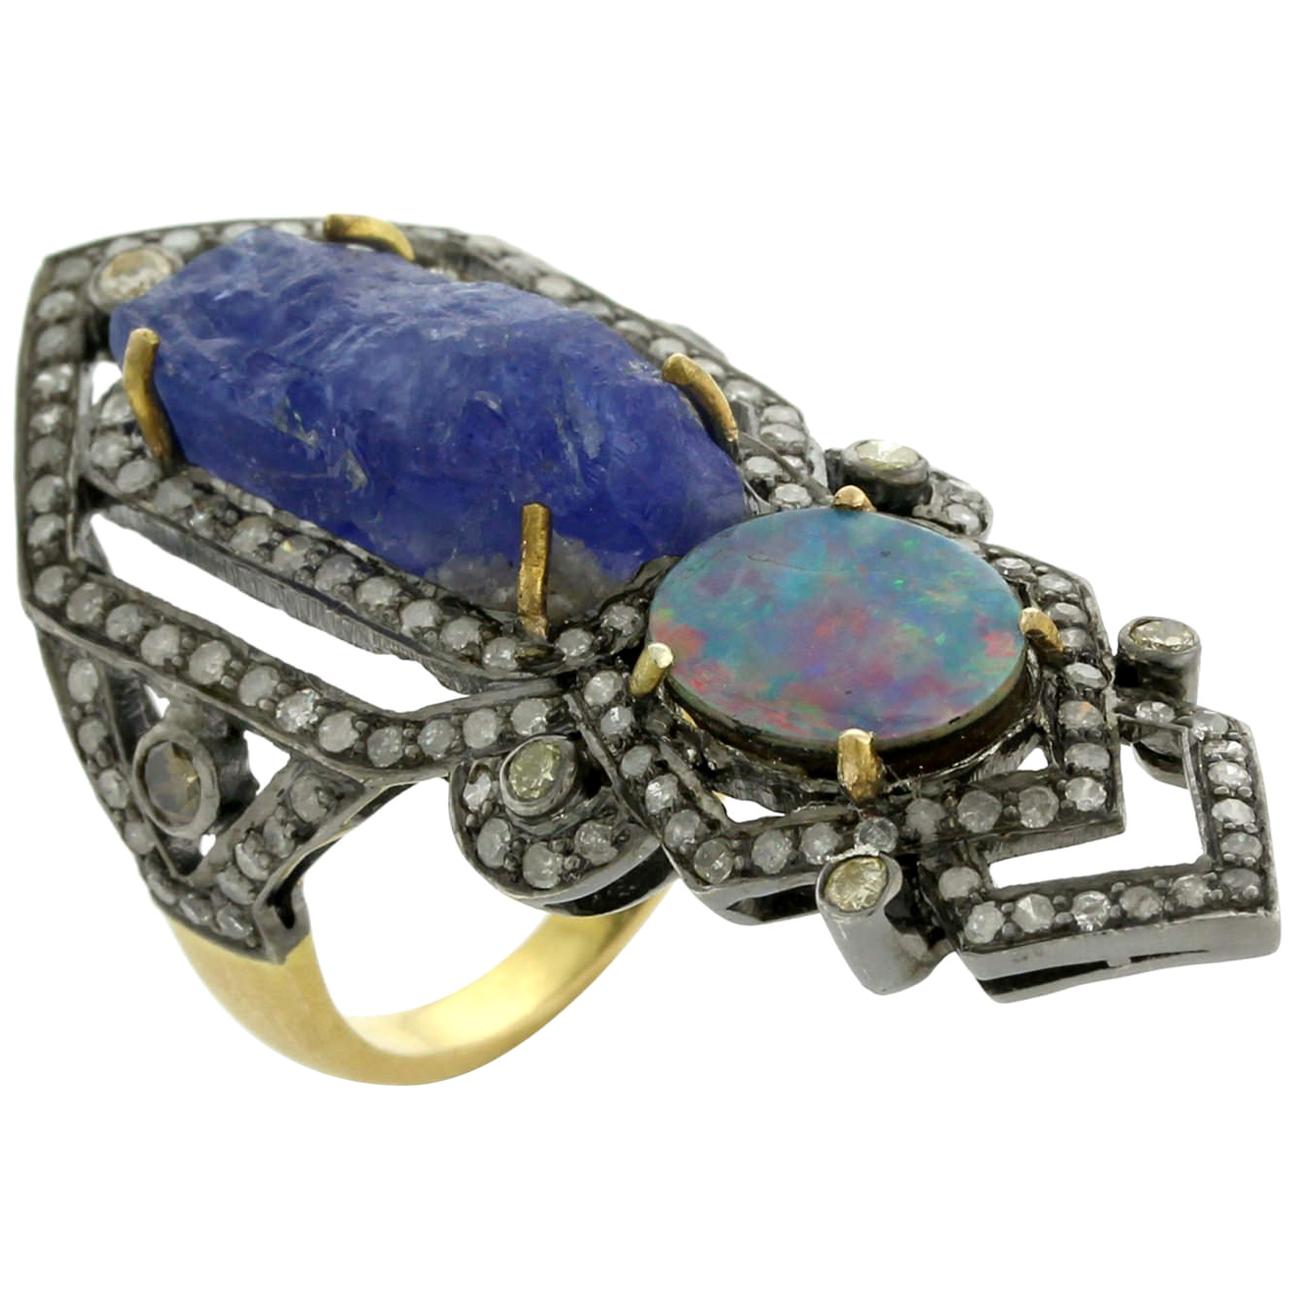 Tanzanite & Multicolor Opal Knuckle Ring With Pave Diamonds In 18k Gold & Silver